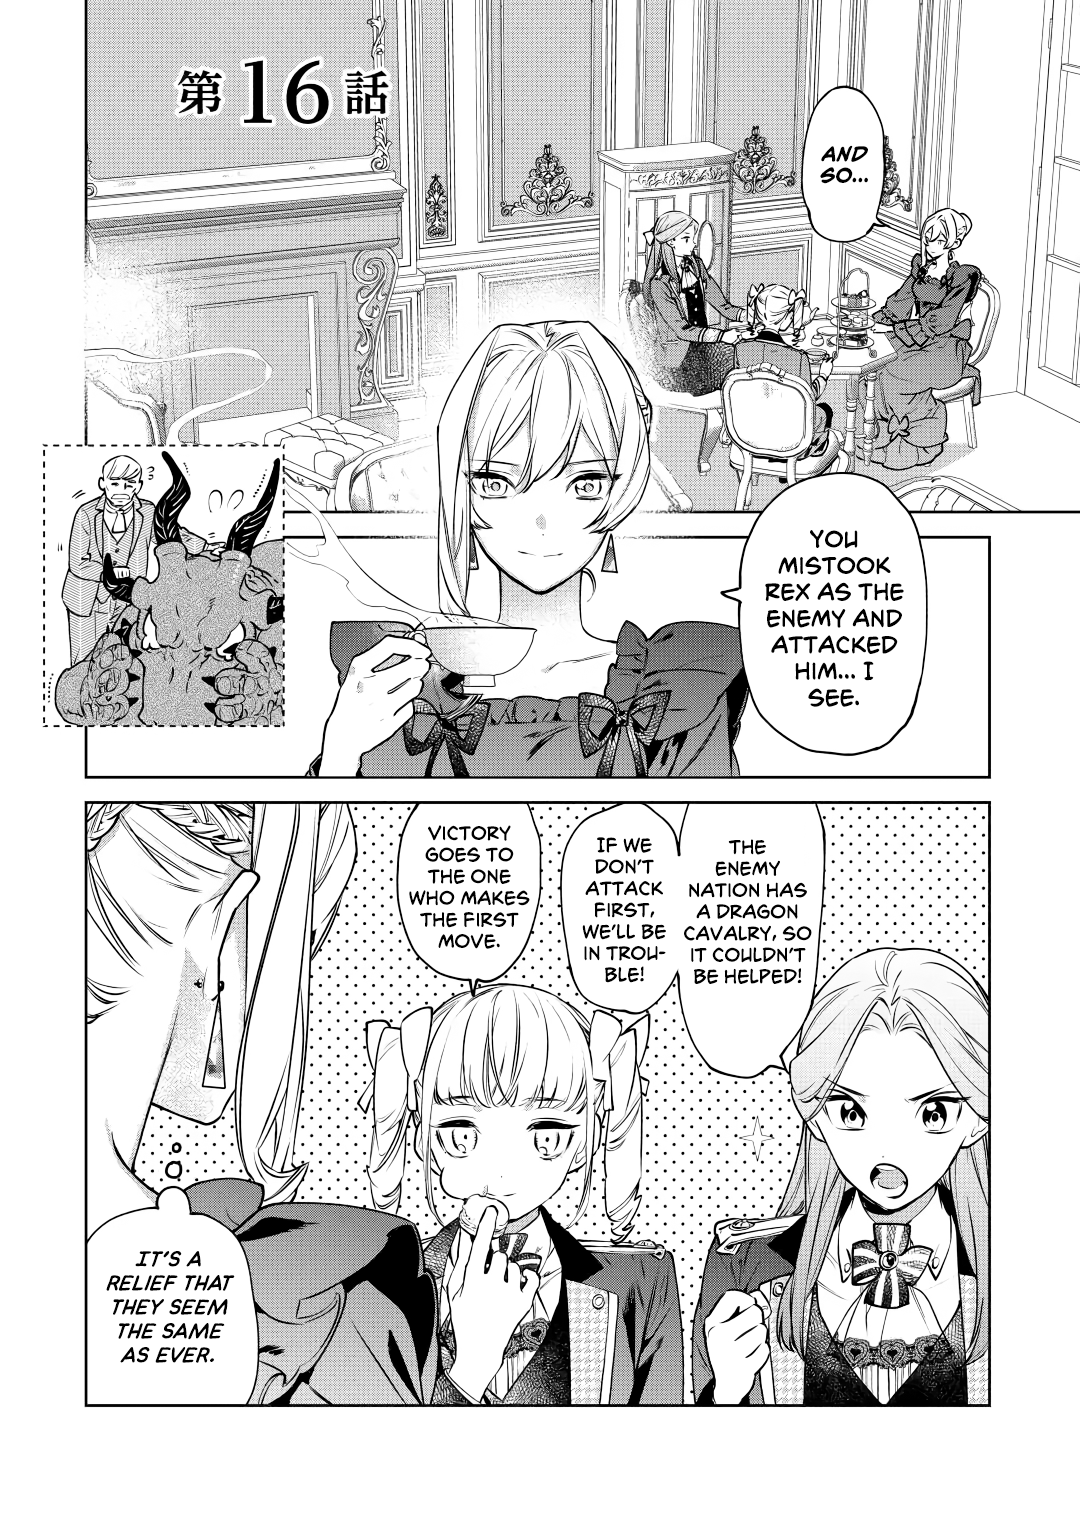 May I Ask For One Final Thing? - Page 1